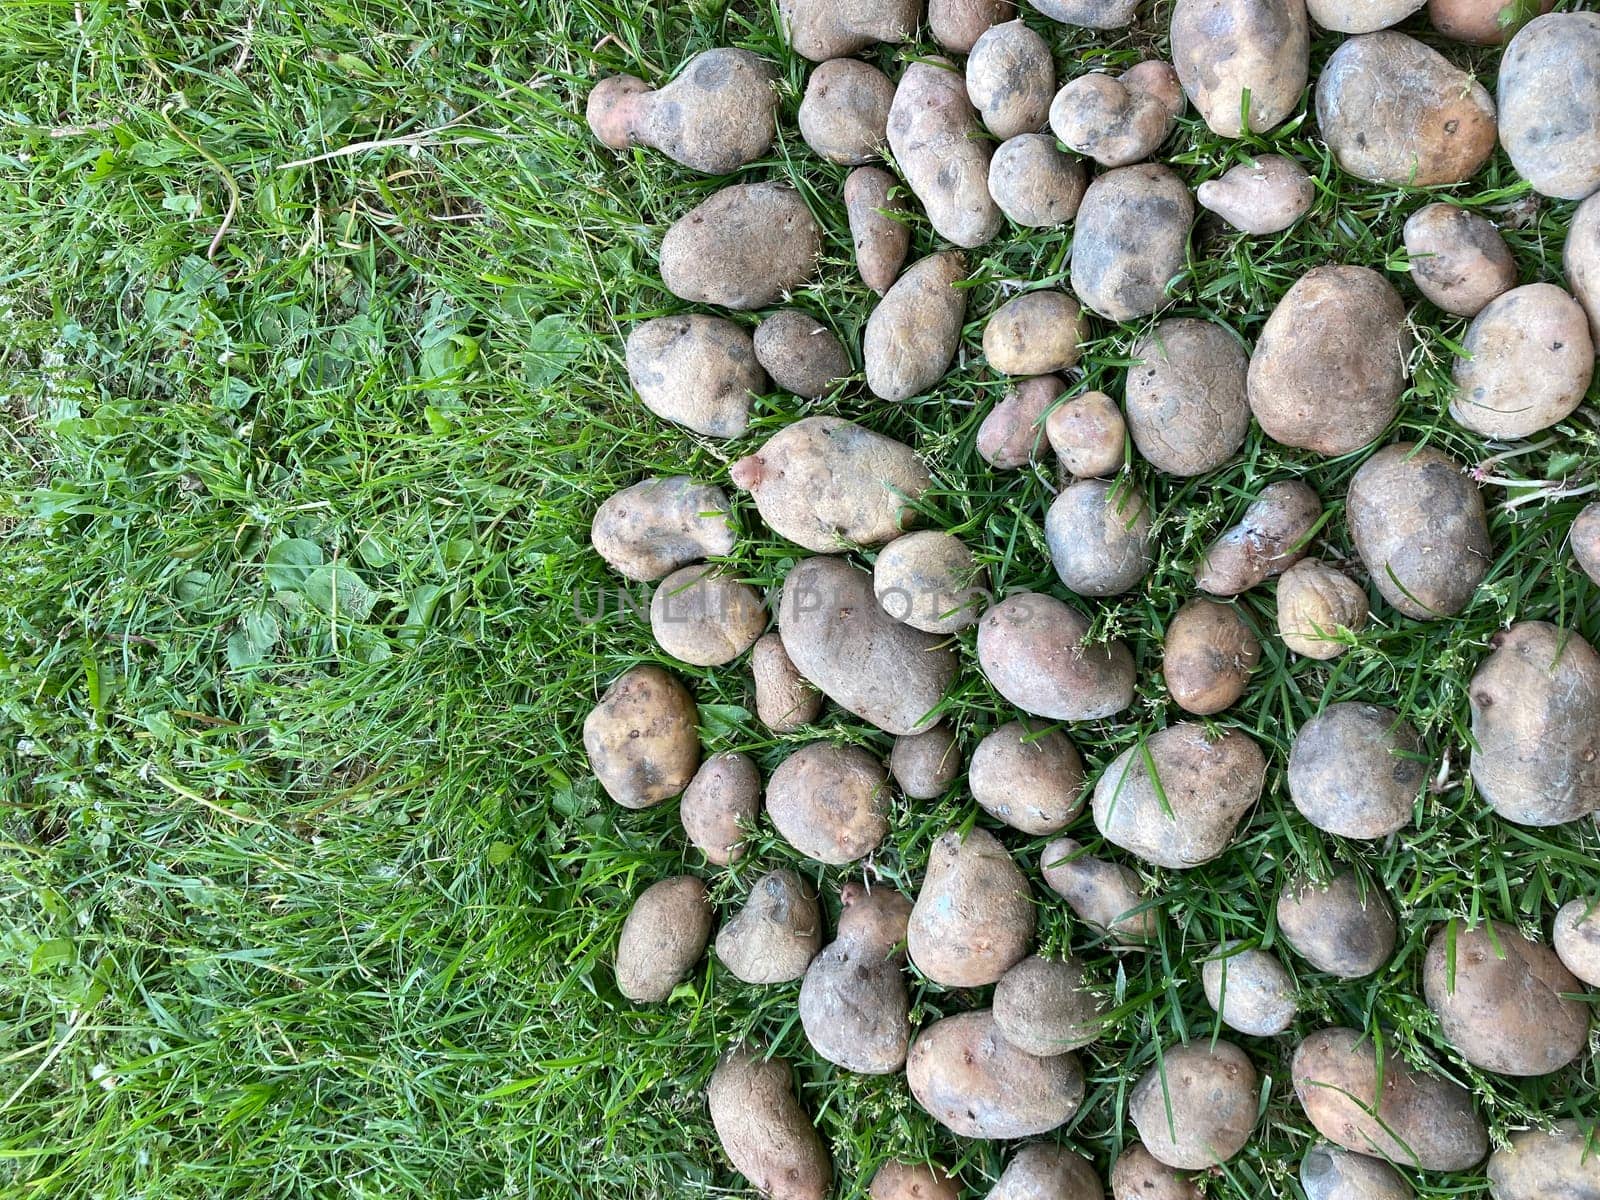 Old potatoes are drying on a the grass